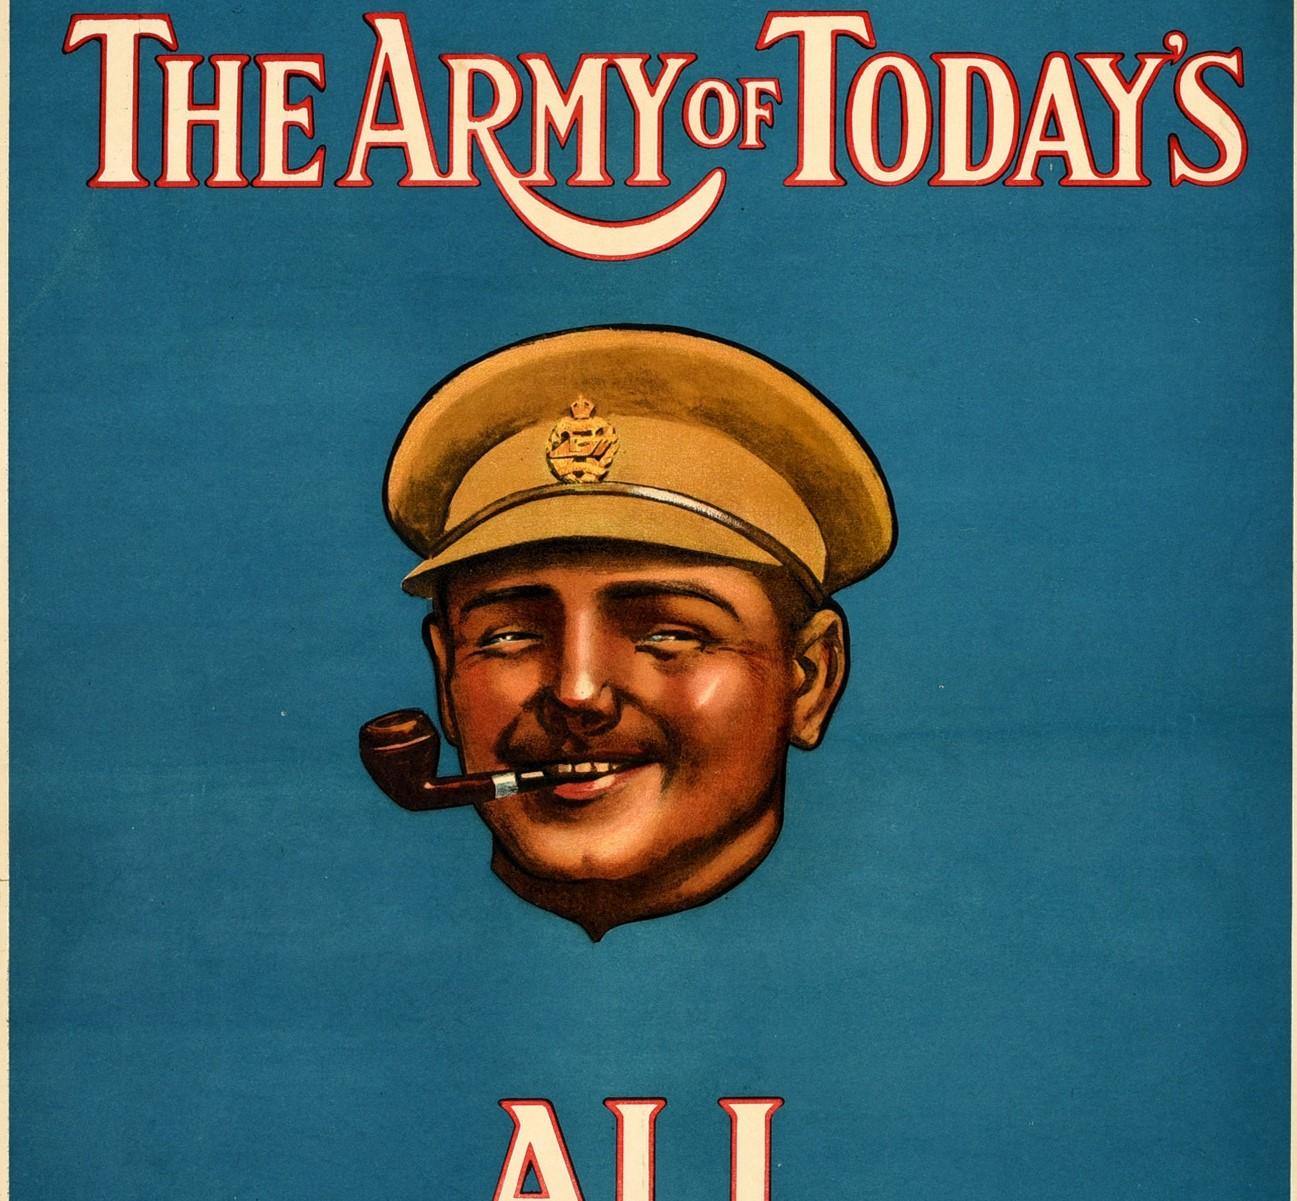 Original antique military recruitment poster - The Army of Today's All Right! - featuring a great design of a smiling soldier smoking a pipe on a blue background with the stylised bold white and red lettering above and below. Excellent condition,